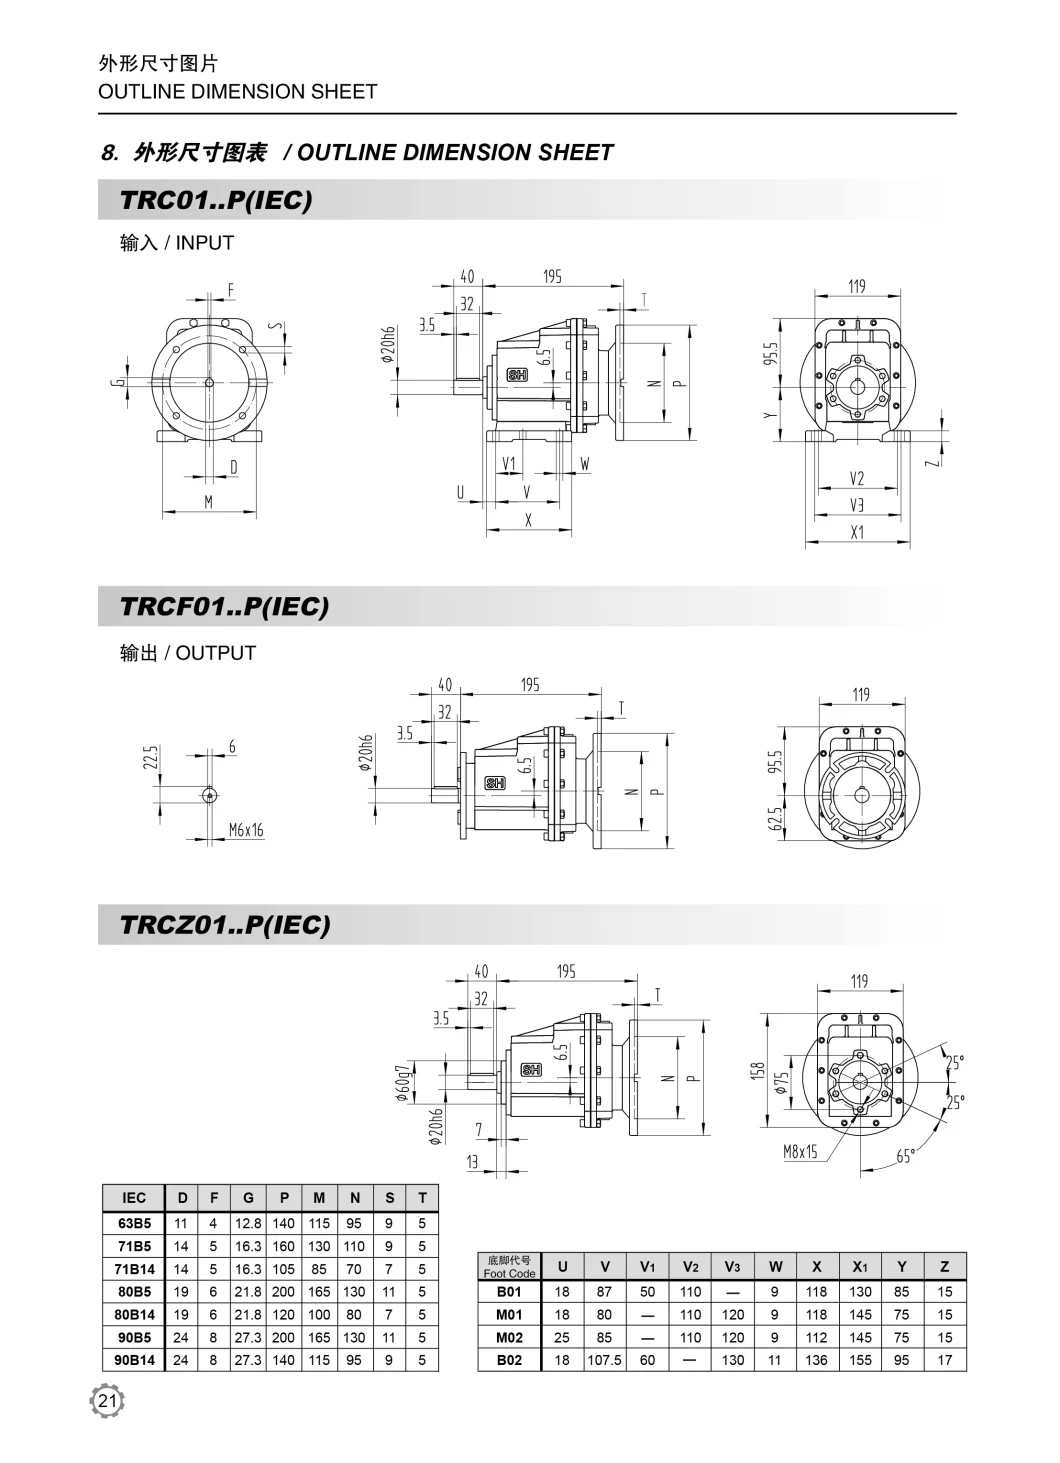 Src01 Helical Gear Reducer Helical Gearbox Motor Speed Reducer Factory of Gearbox Transmission Motor Reductor Helical Gear Reductor Manufacture Helical Reducer